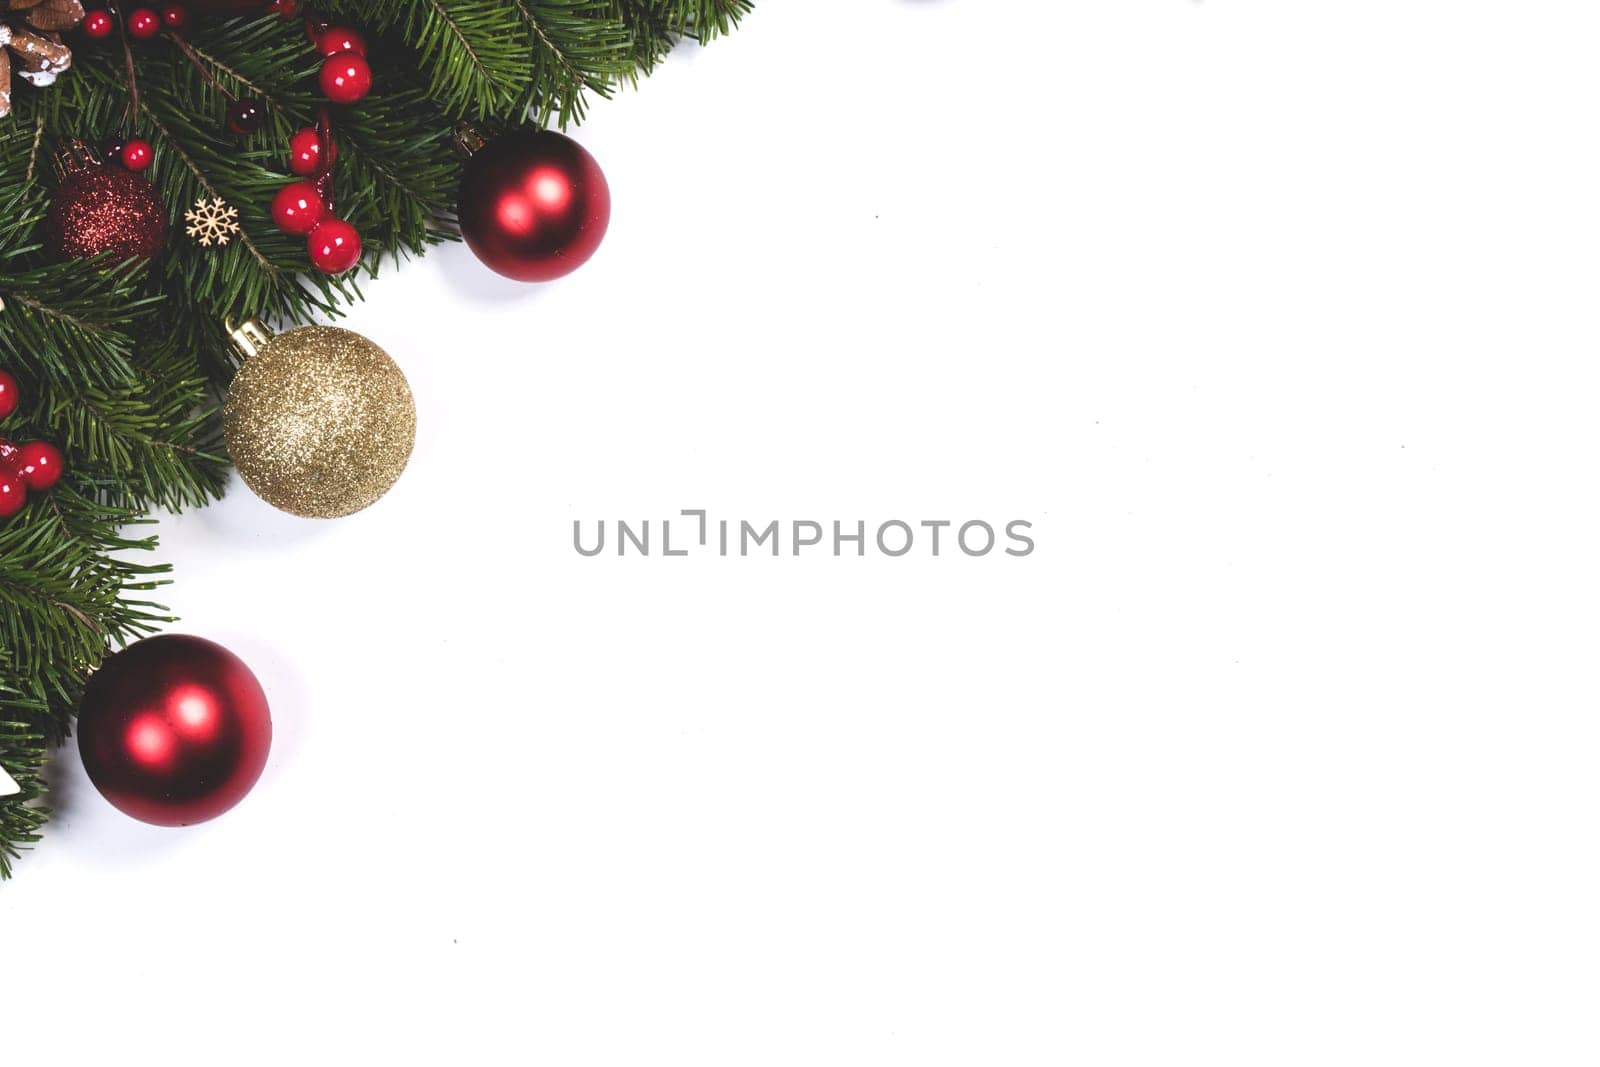 Christmas tree branches and decoration baubles isolated on white background as a border or template for christmas card